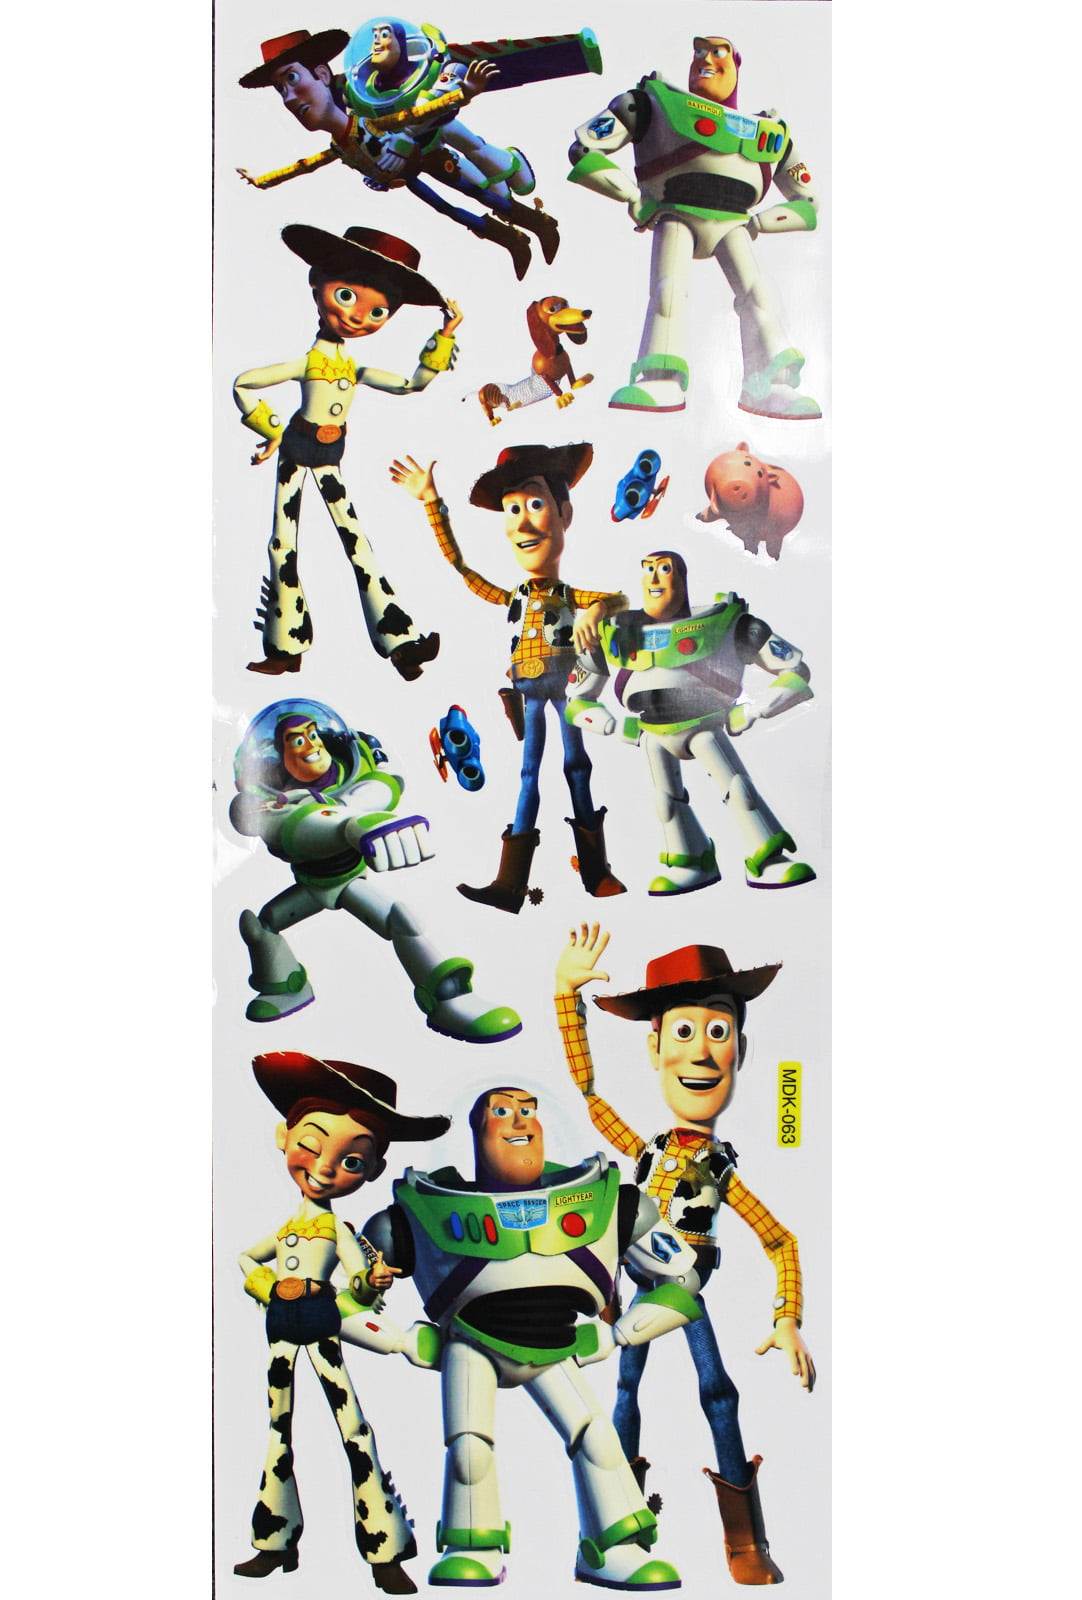 Toy Story 4 Fun Assortment Stickers Over 80 Stickers Official Licensed Product for sale online 